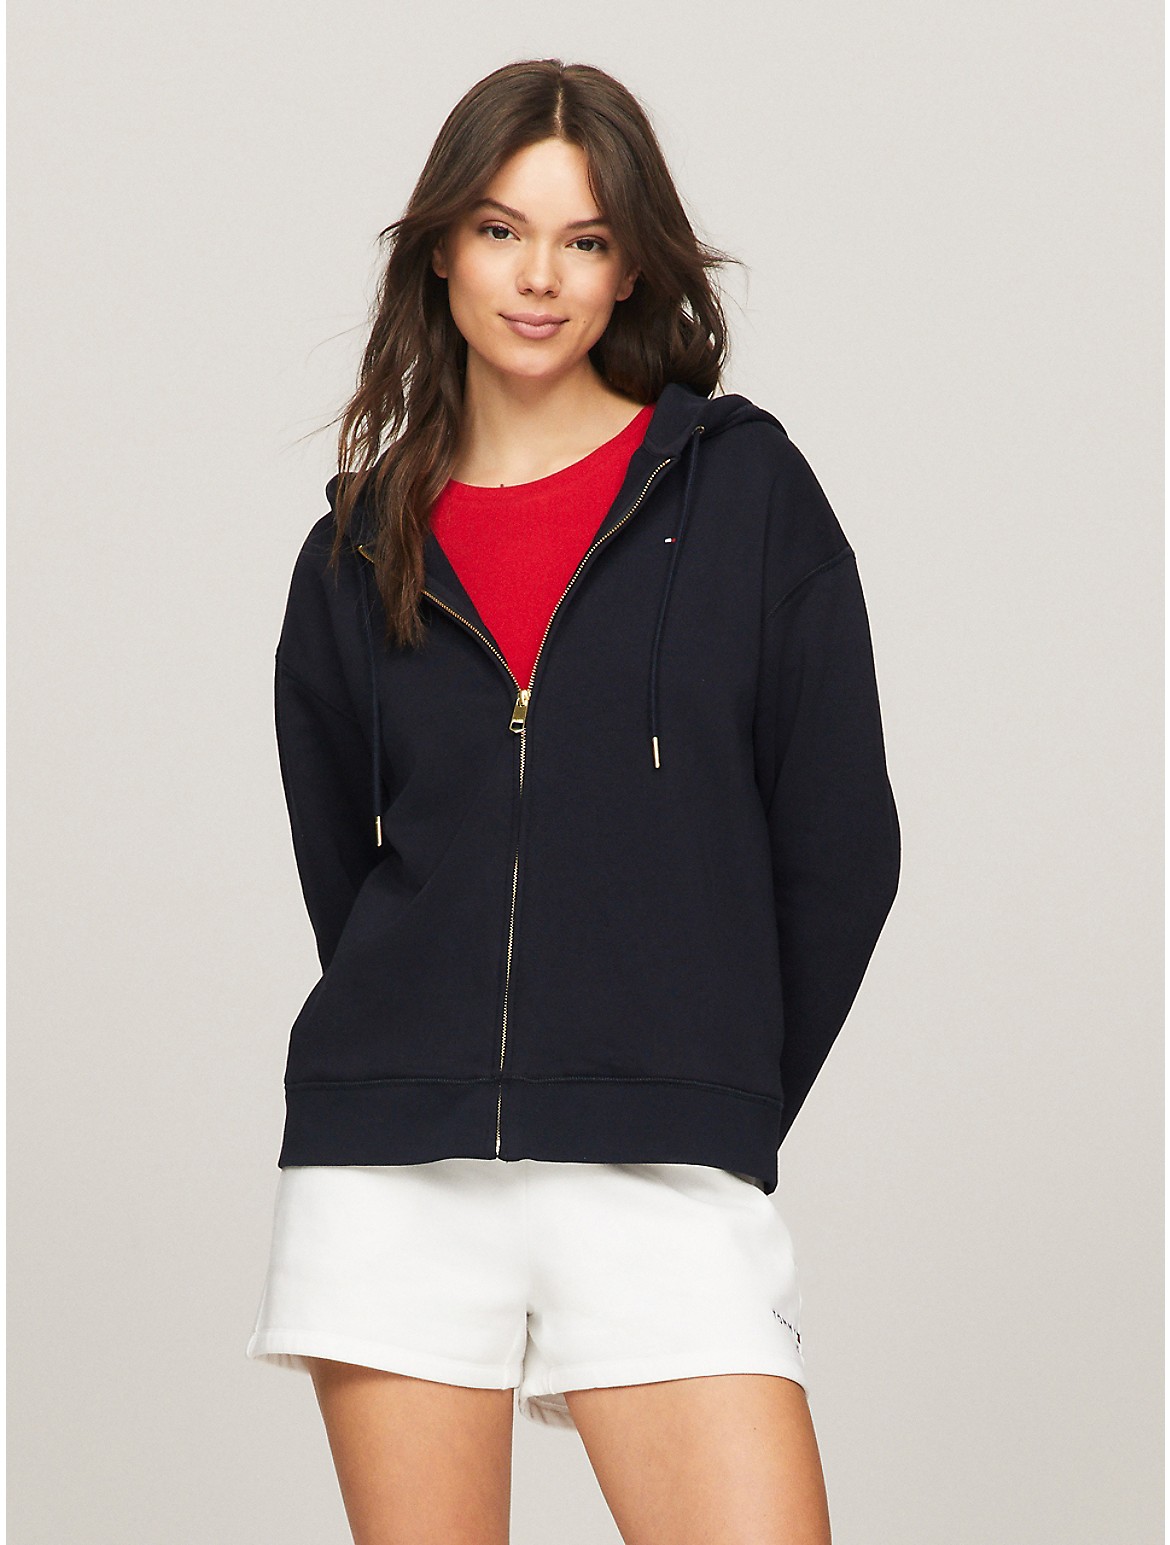 Tommy Hilfiger Women's Relaxed Fit Solid Zip Hoodie